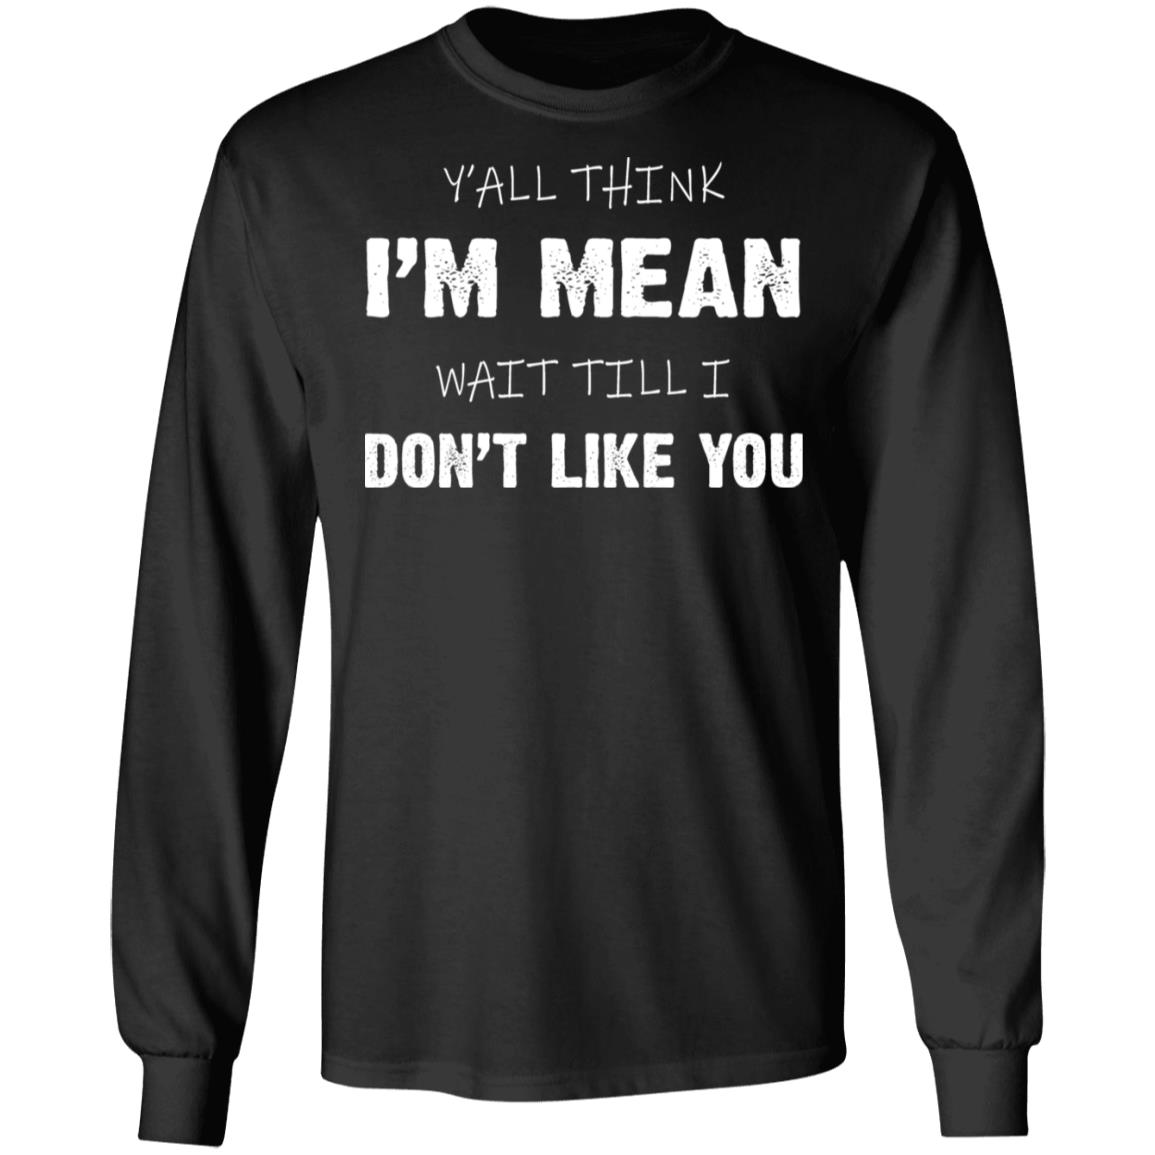 Y’all Think I’m Mean Wait Till I Don’t Like You Shirt | Teemoonley.com